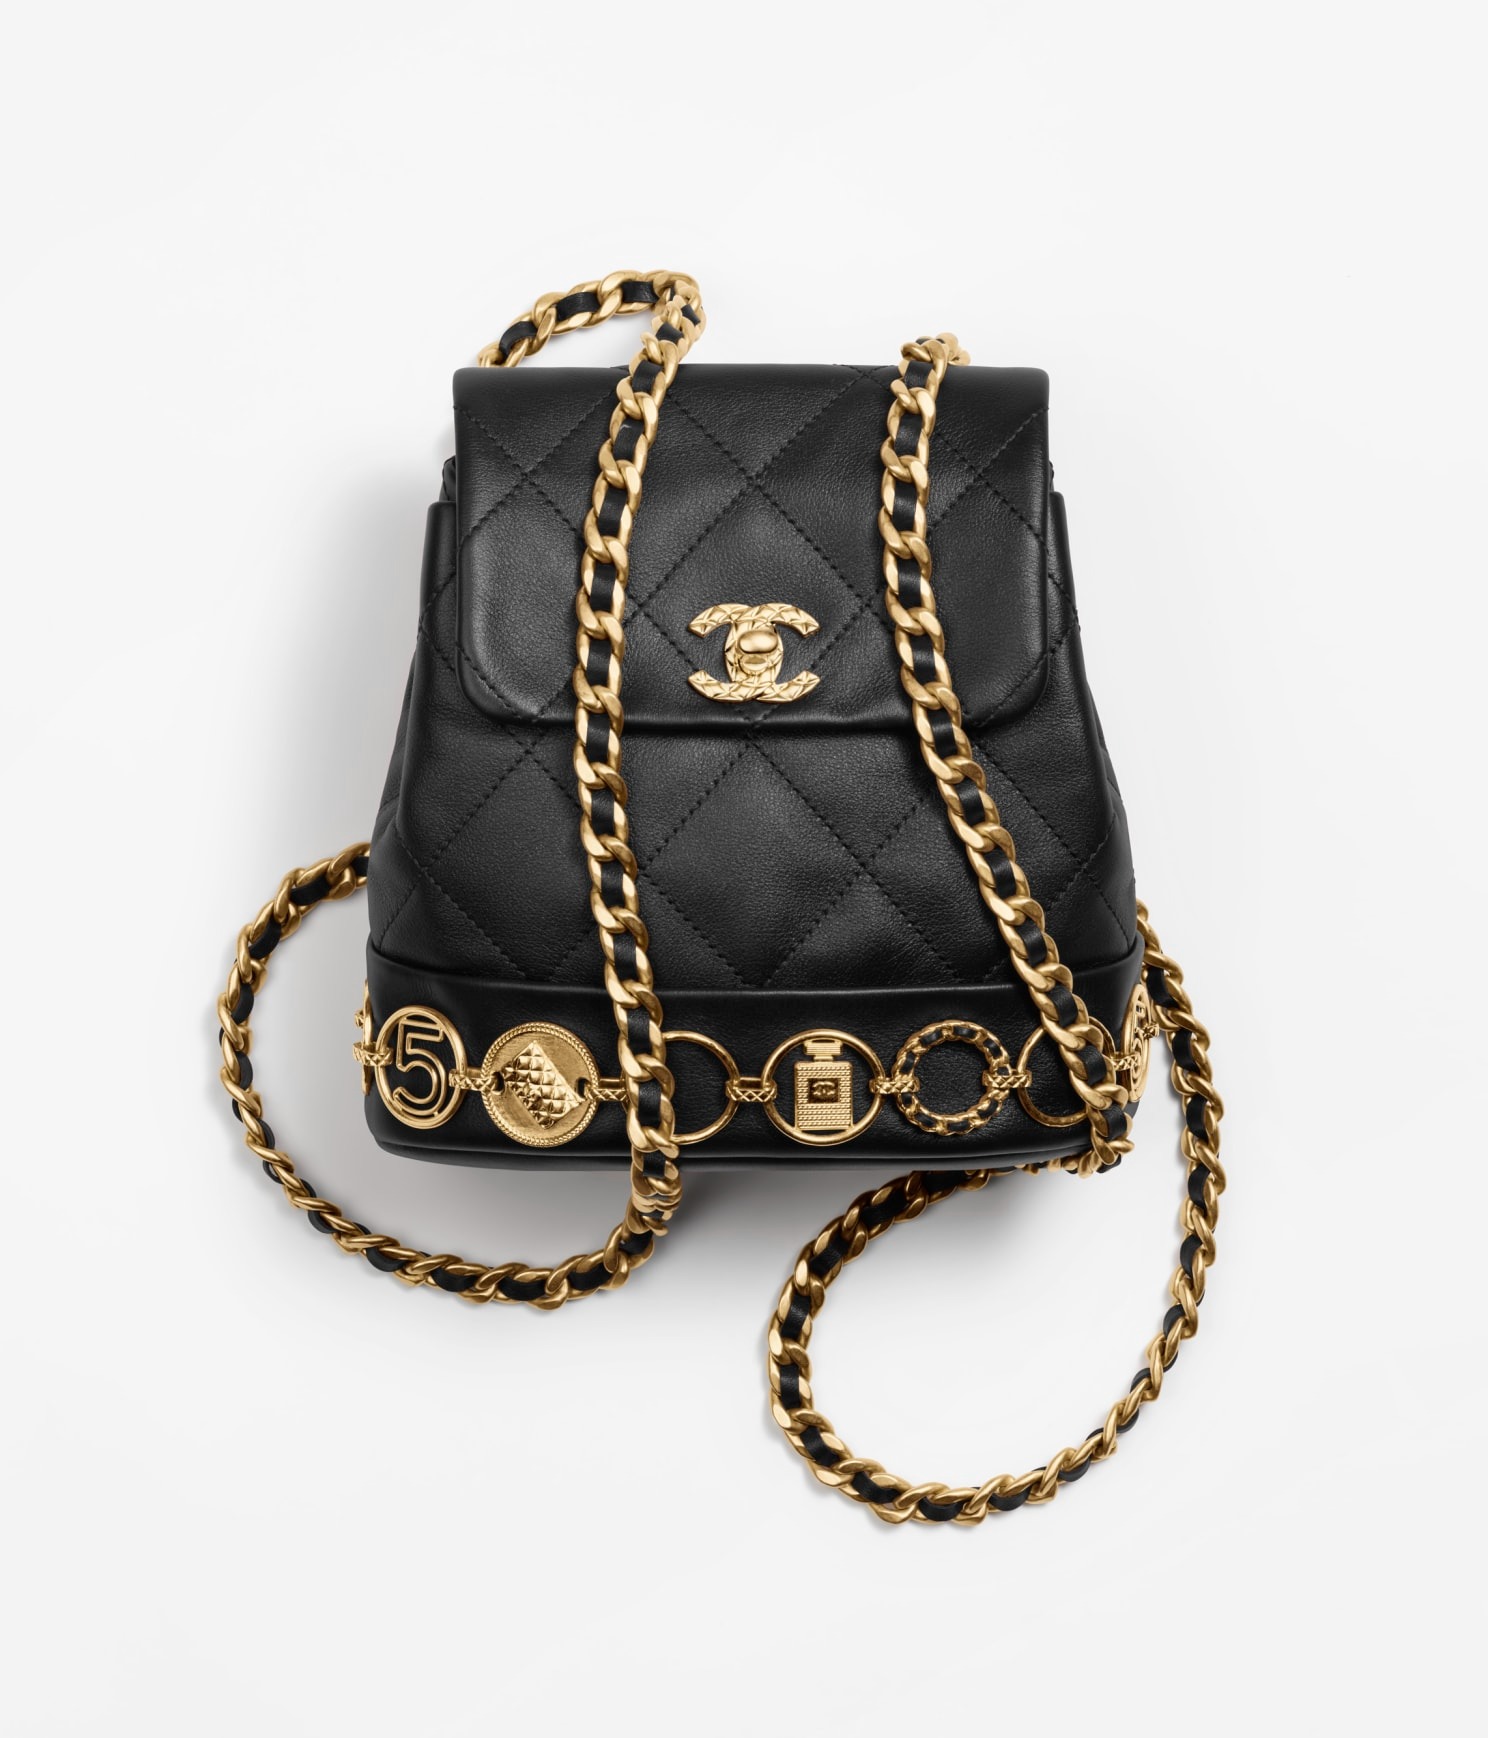 5 Things You NEED To Know Before Buying YOUR FIRST CHANEL Bag